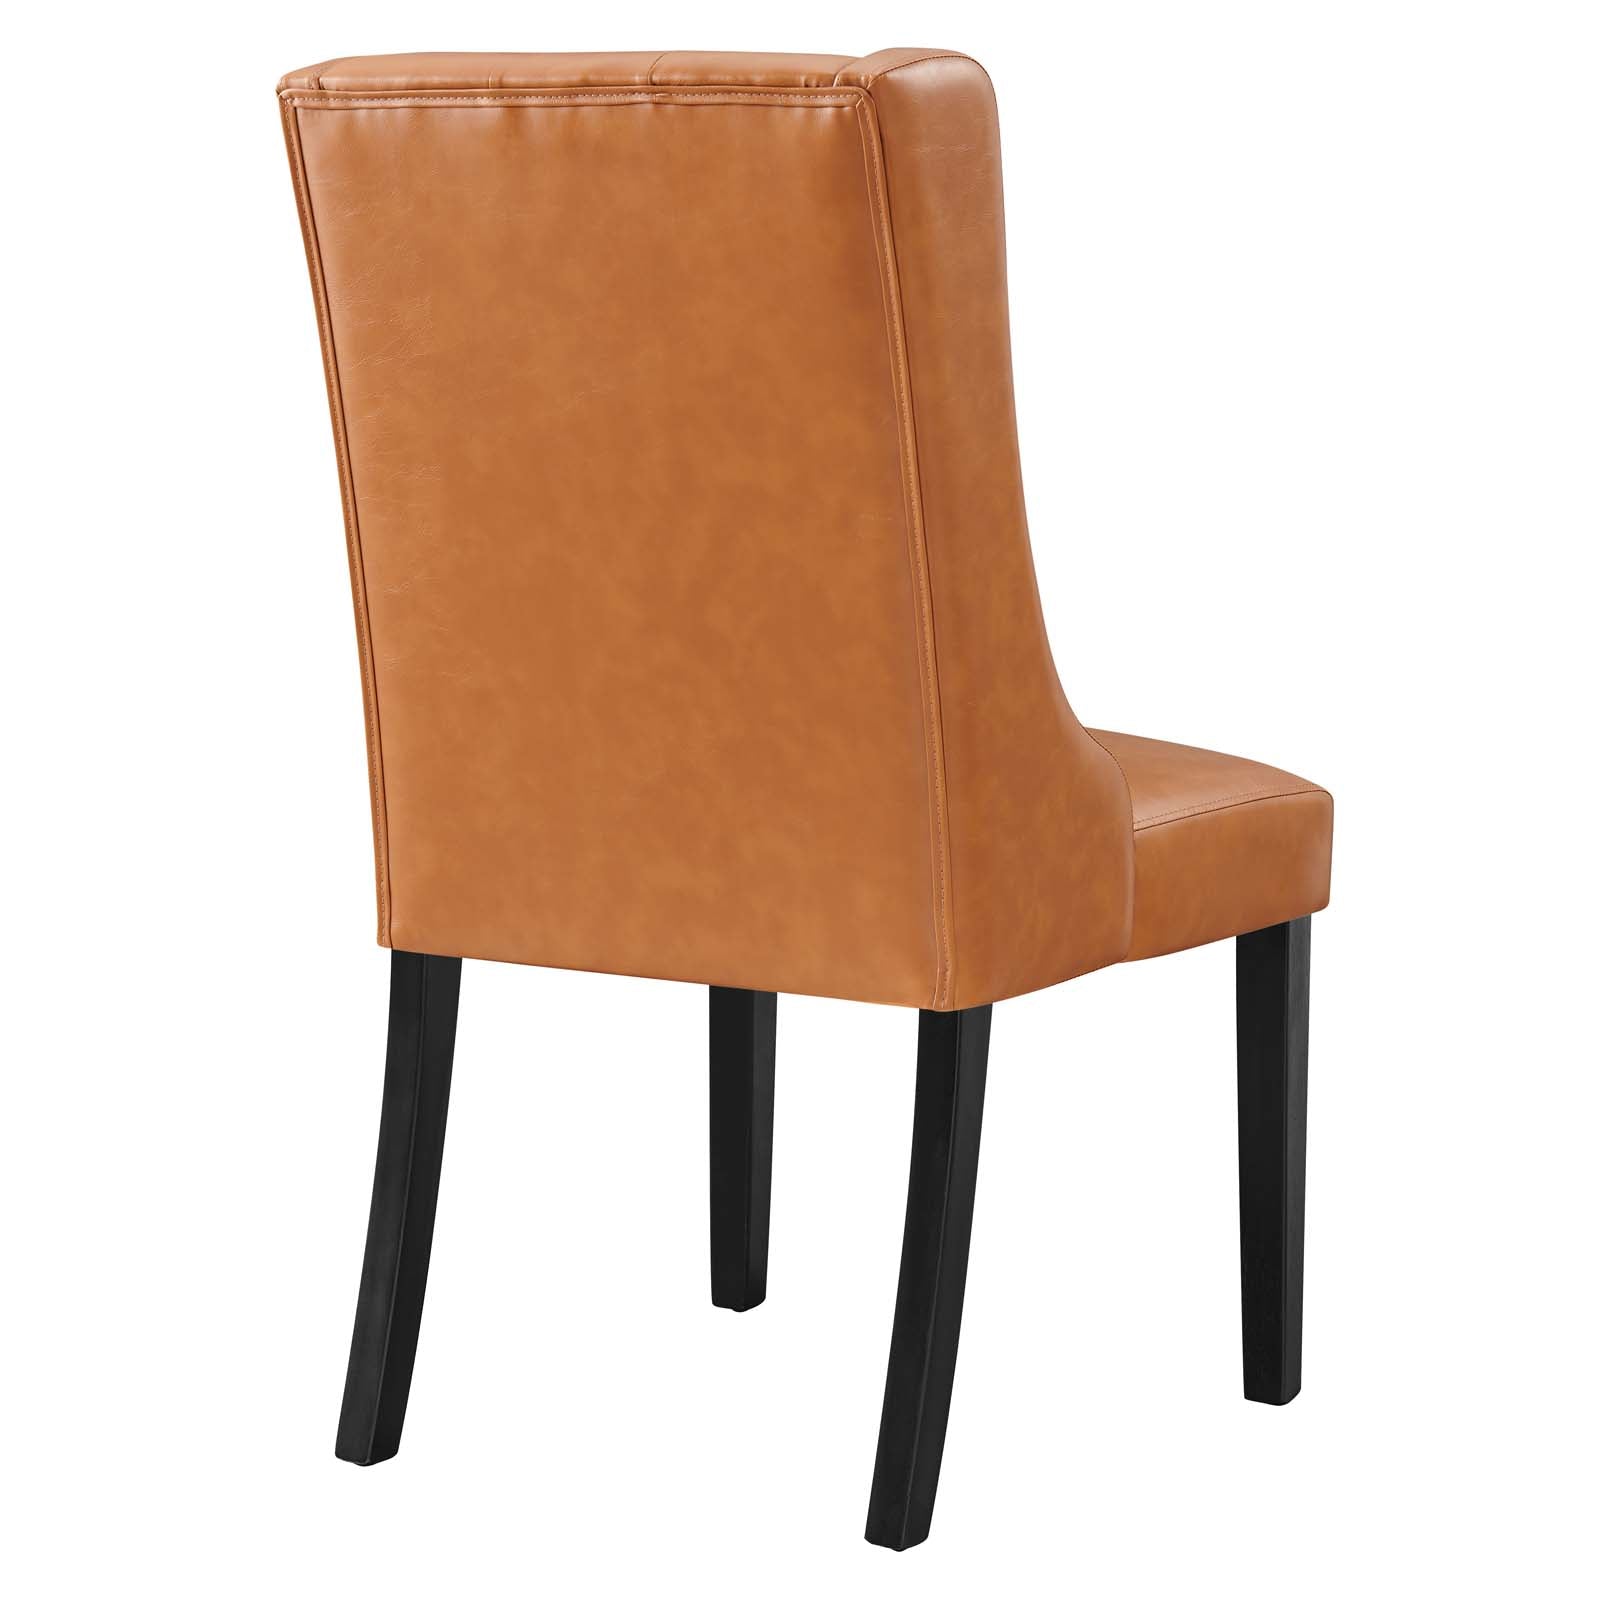 Baronet Button Tufted Vegan Leather Dining Chair - East Shore Modern Home Furnishings